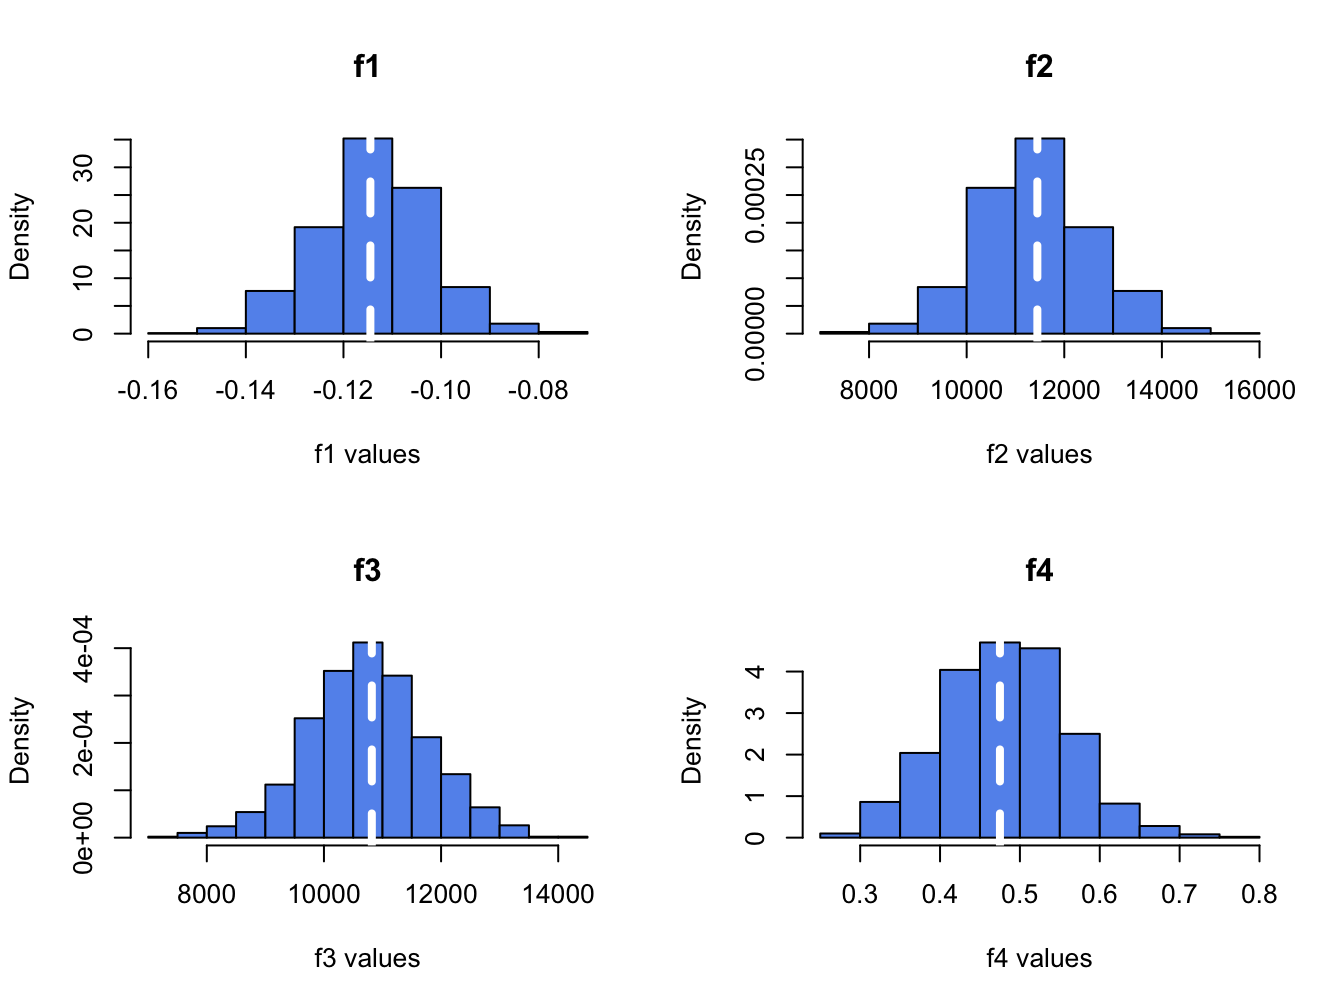 Histograms of $\hat{f}_{j}$ (for $j=1,\ldots, 4$) computed from $N=1000$ Monte Carlo samples from the GWN model.